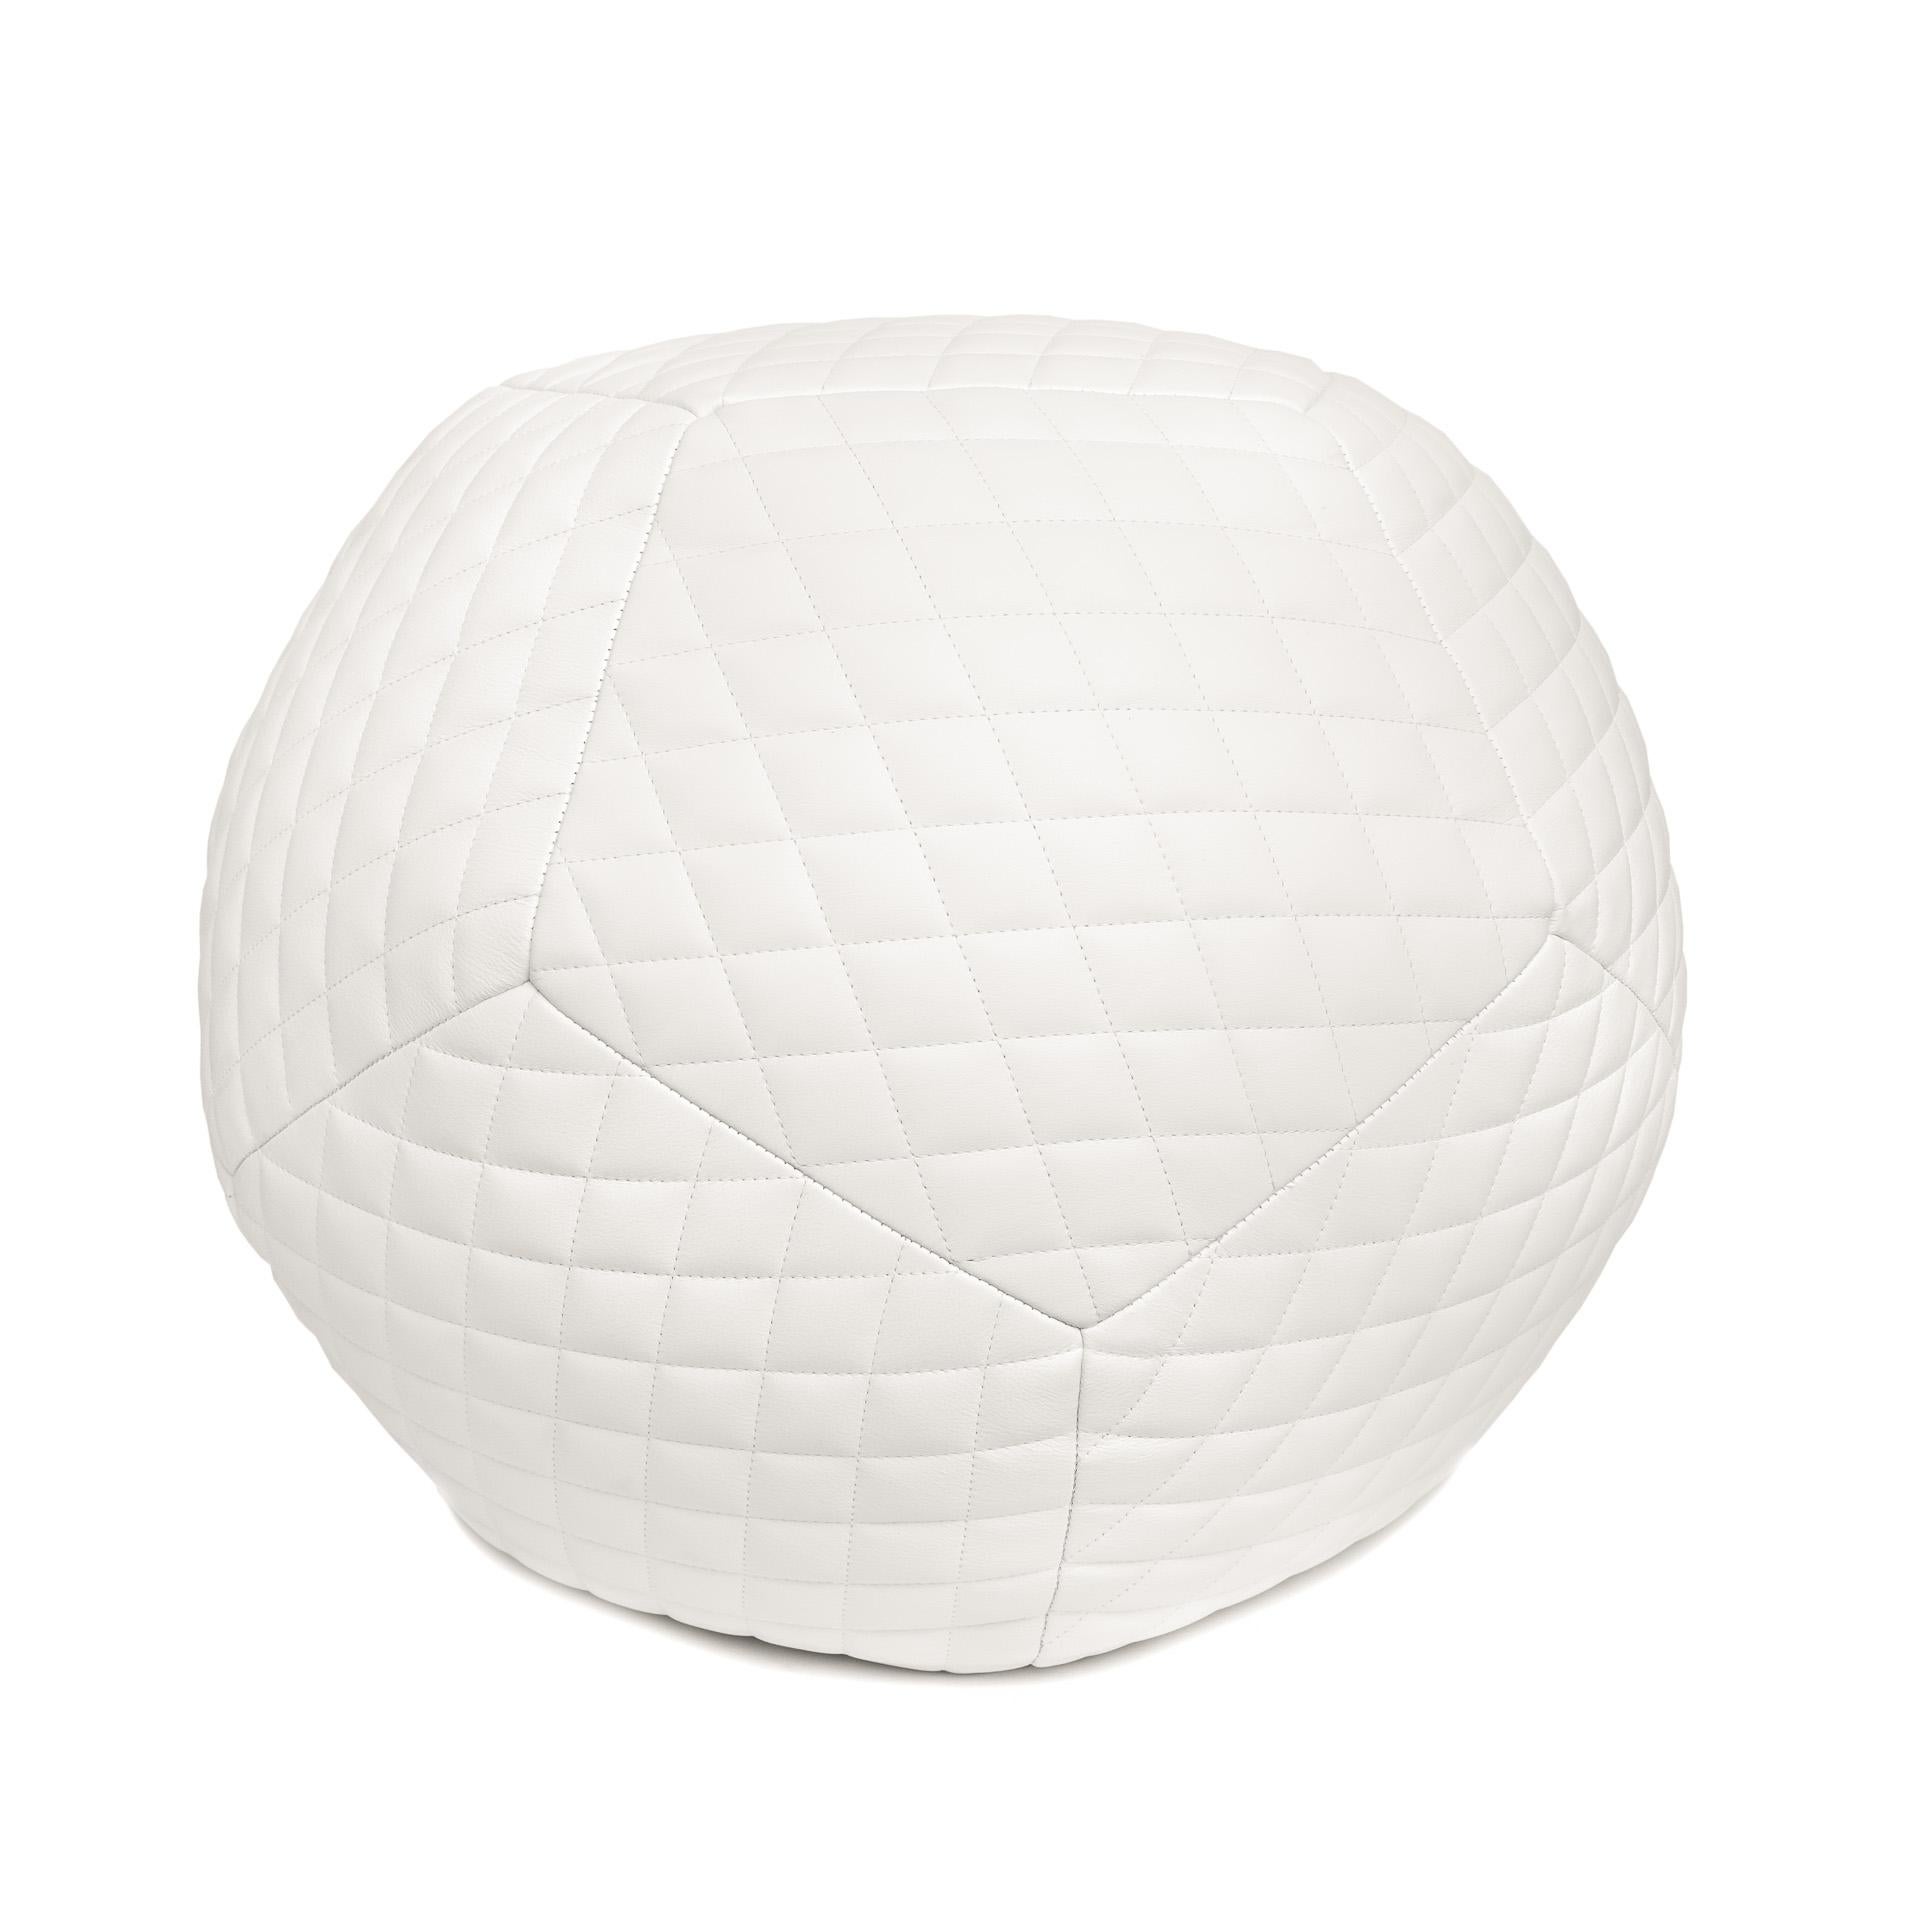 Featured with diamond banded detailing, the Diamond Ottoman is inspired by fundamental geometry. These structured and supportive round ball ottomans are designed to function as a traditional leg rest, add a twist to secondary living room or dining